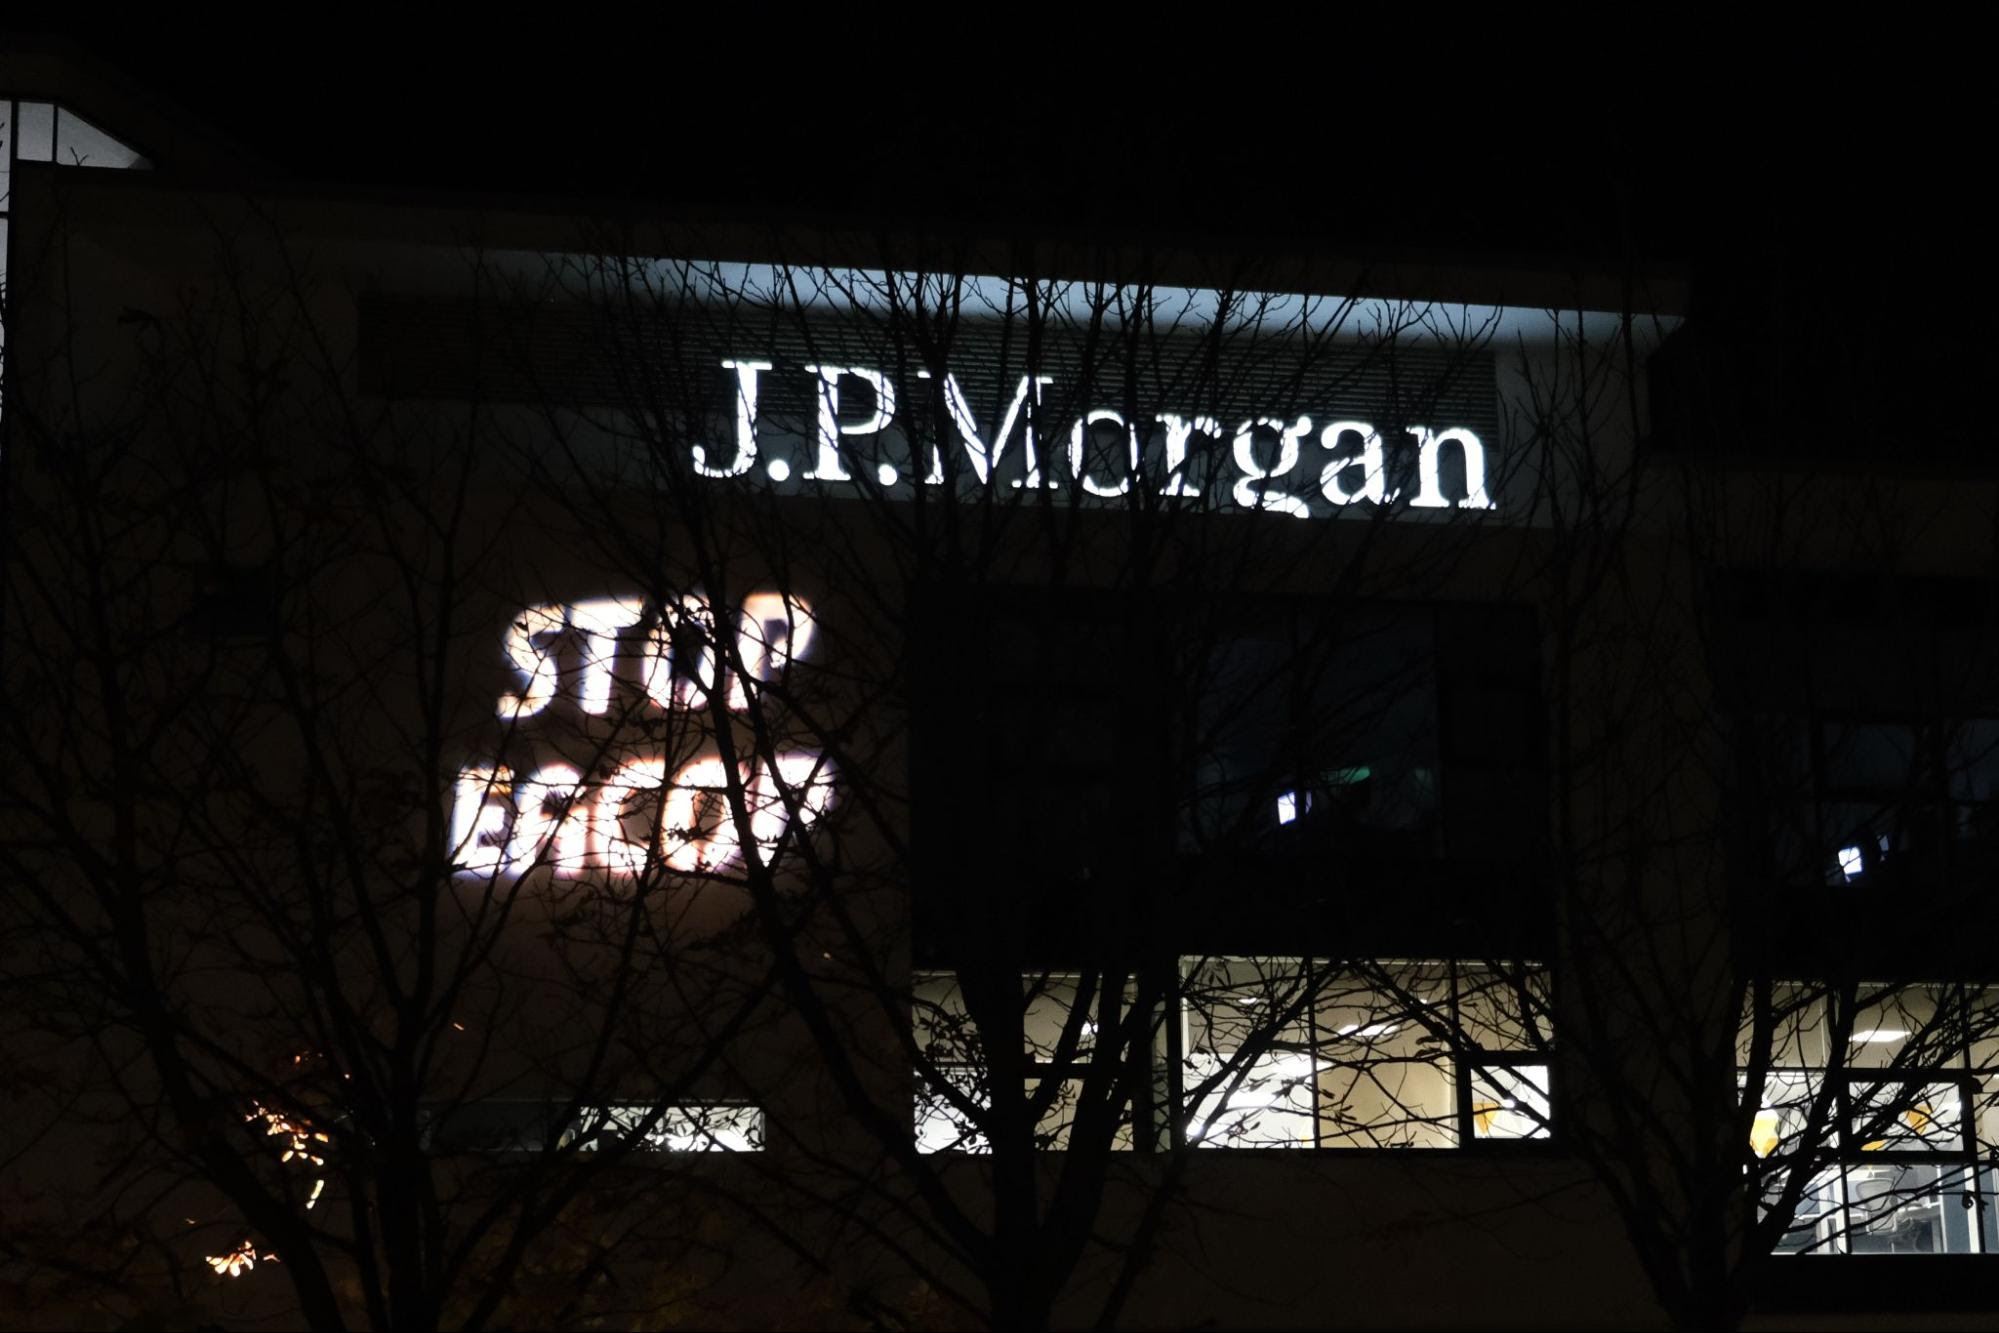 Stop EACOP projected on side of JPMorgan building